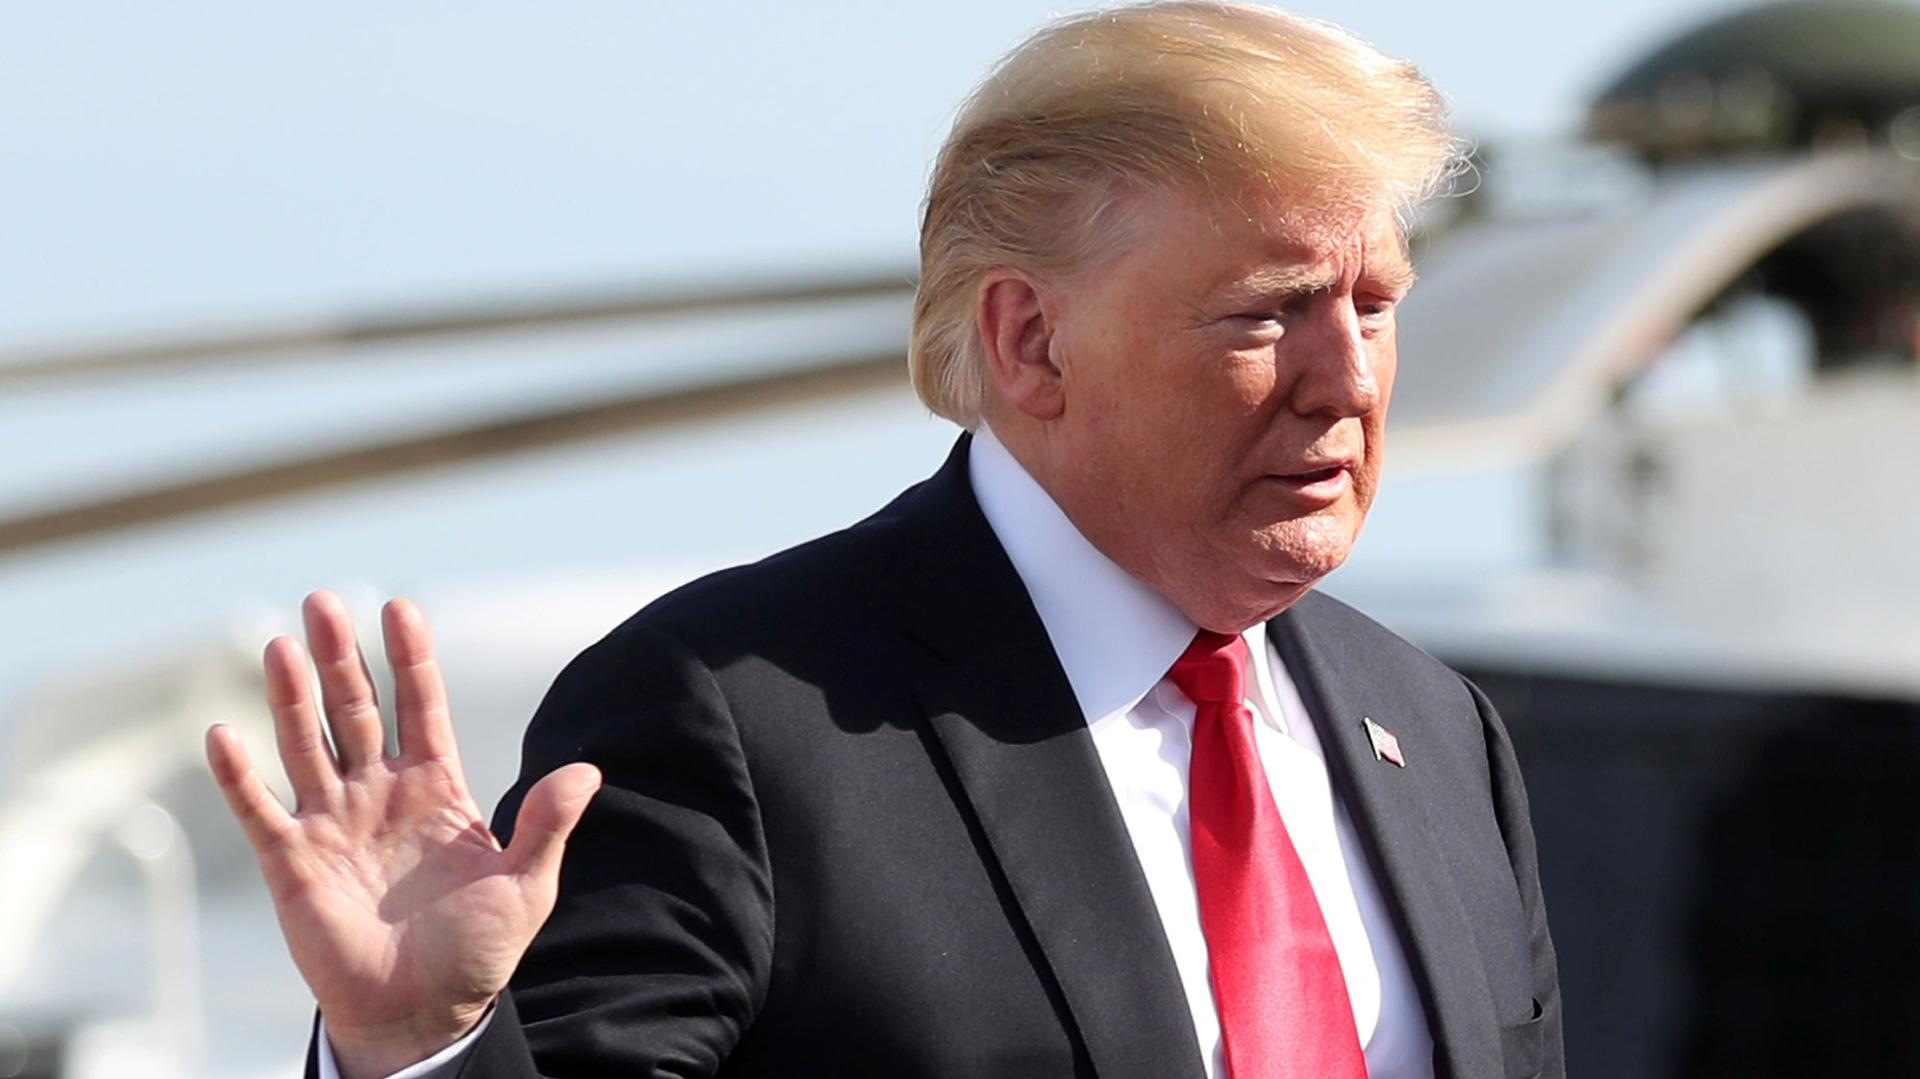 US President Donald Trump is shown with his right hand raised and wearing a dark suit with a red tie.